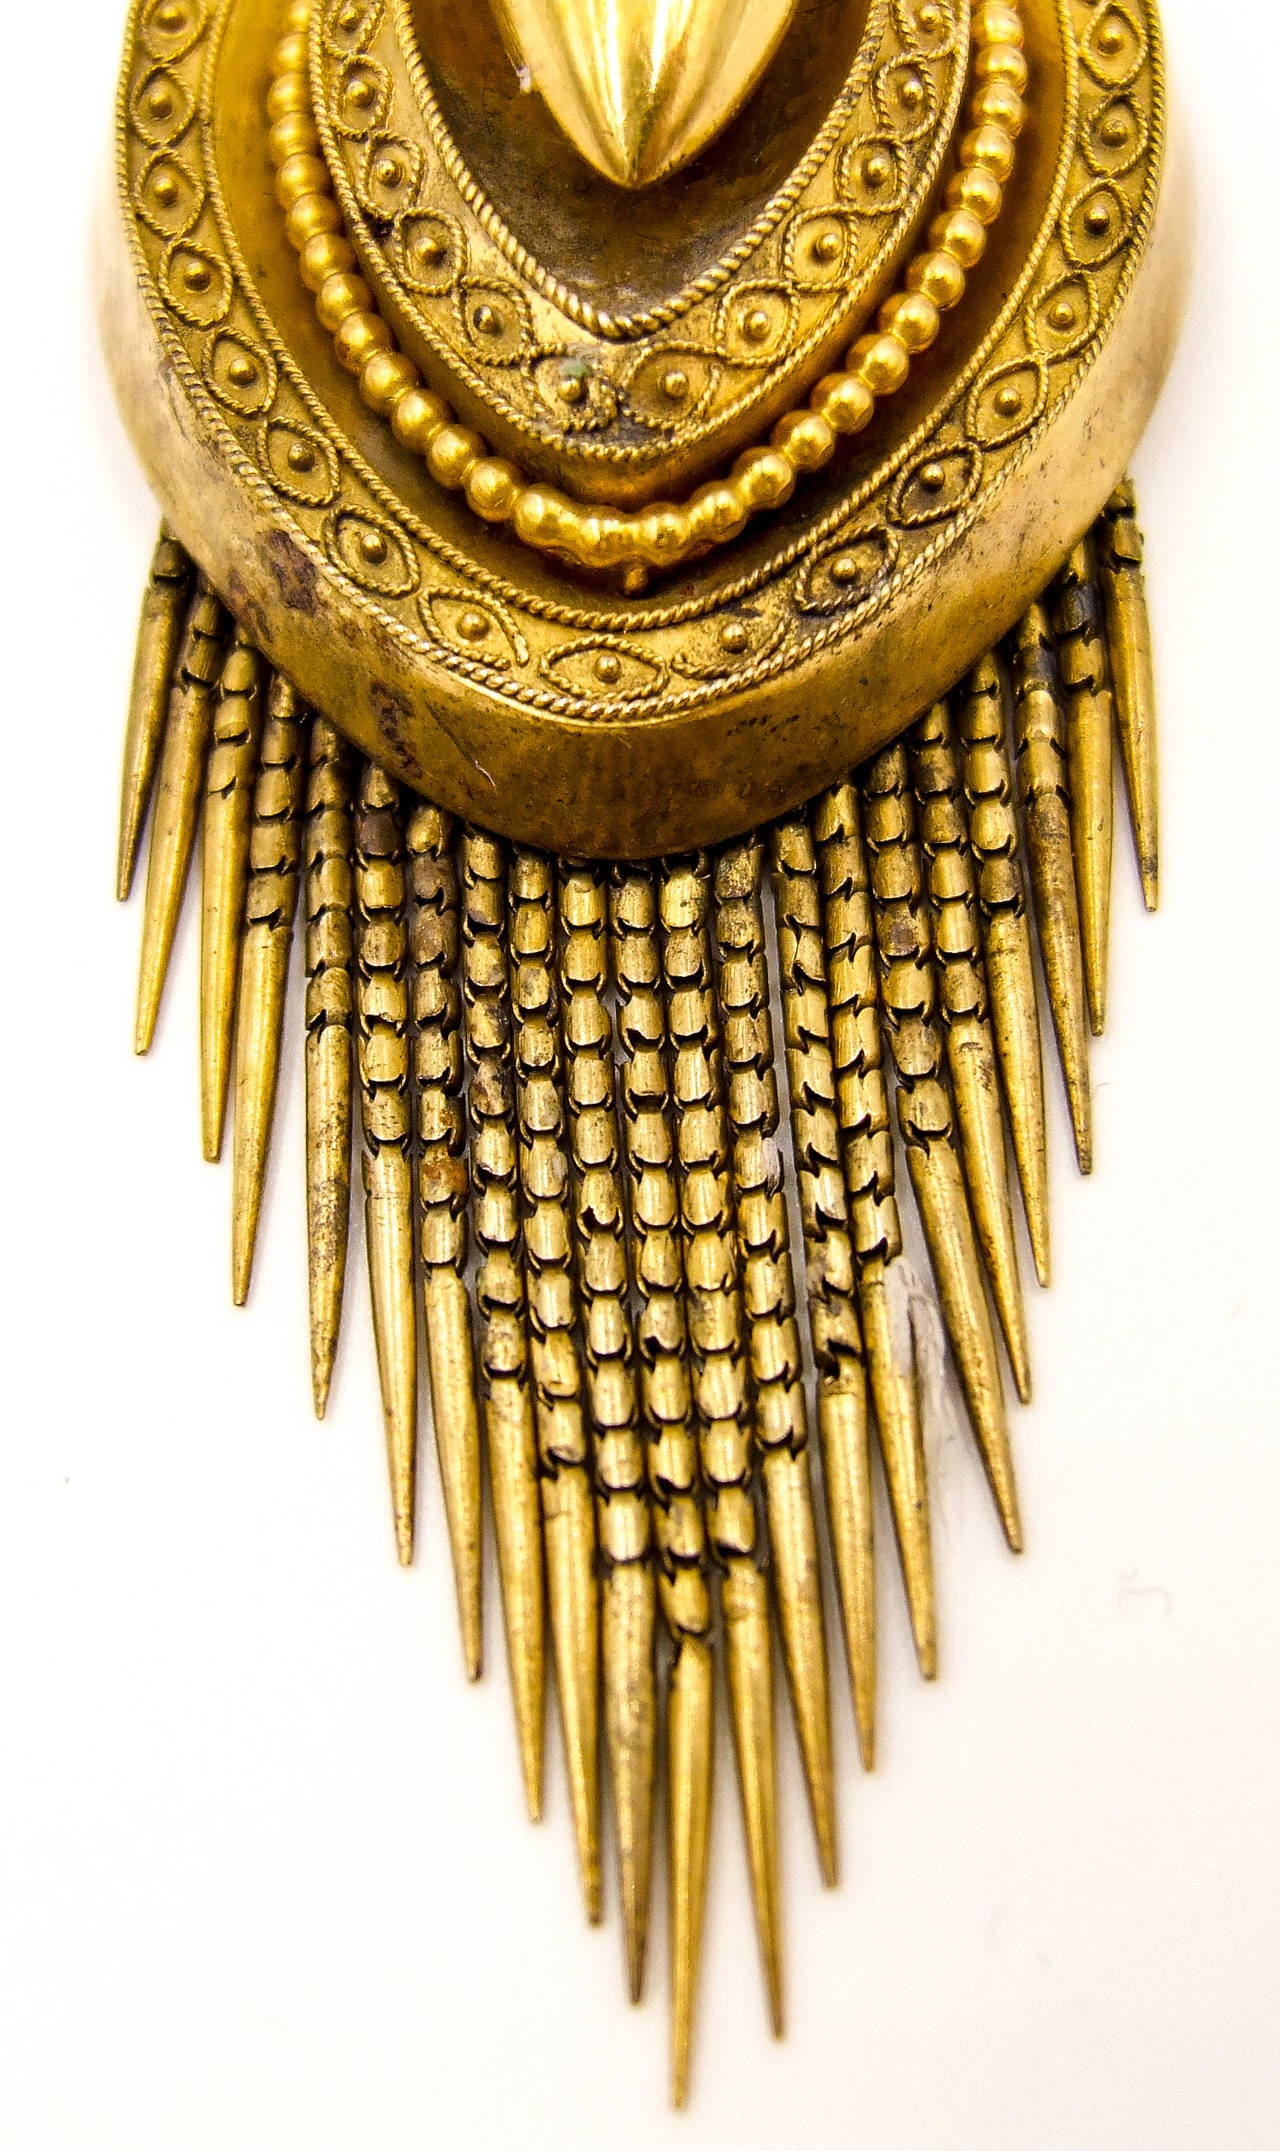 Victorian elegance in a stylish granulation adorned pendant.  The rear compartment houses two locks of different colored curls of hair, and the front boasts a graduated, handmade fringe of gold.